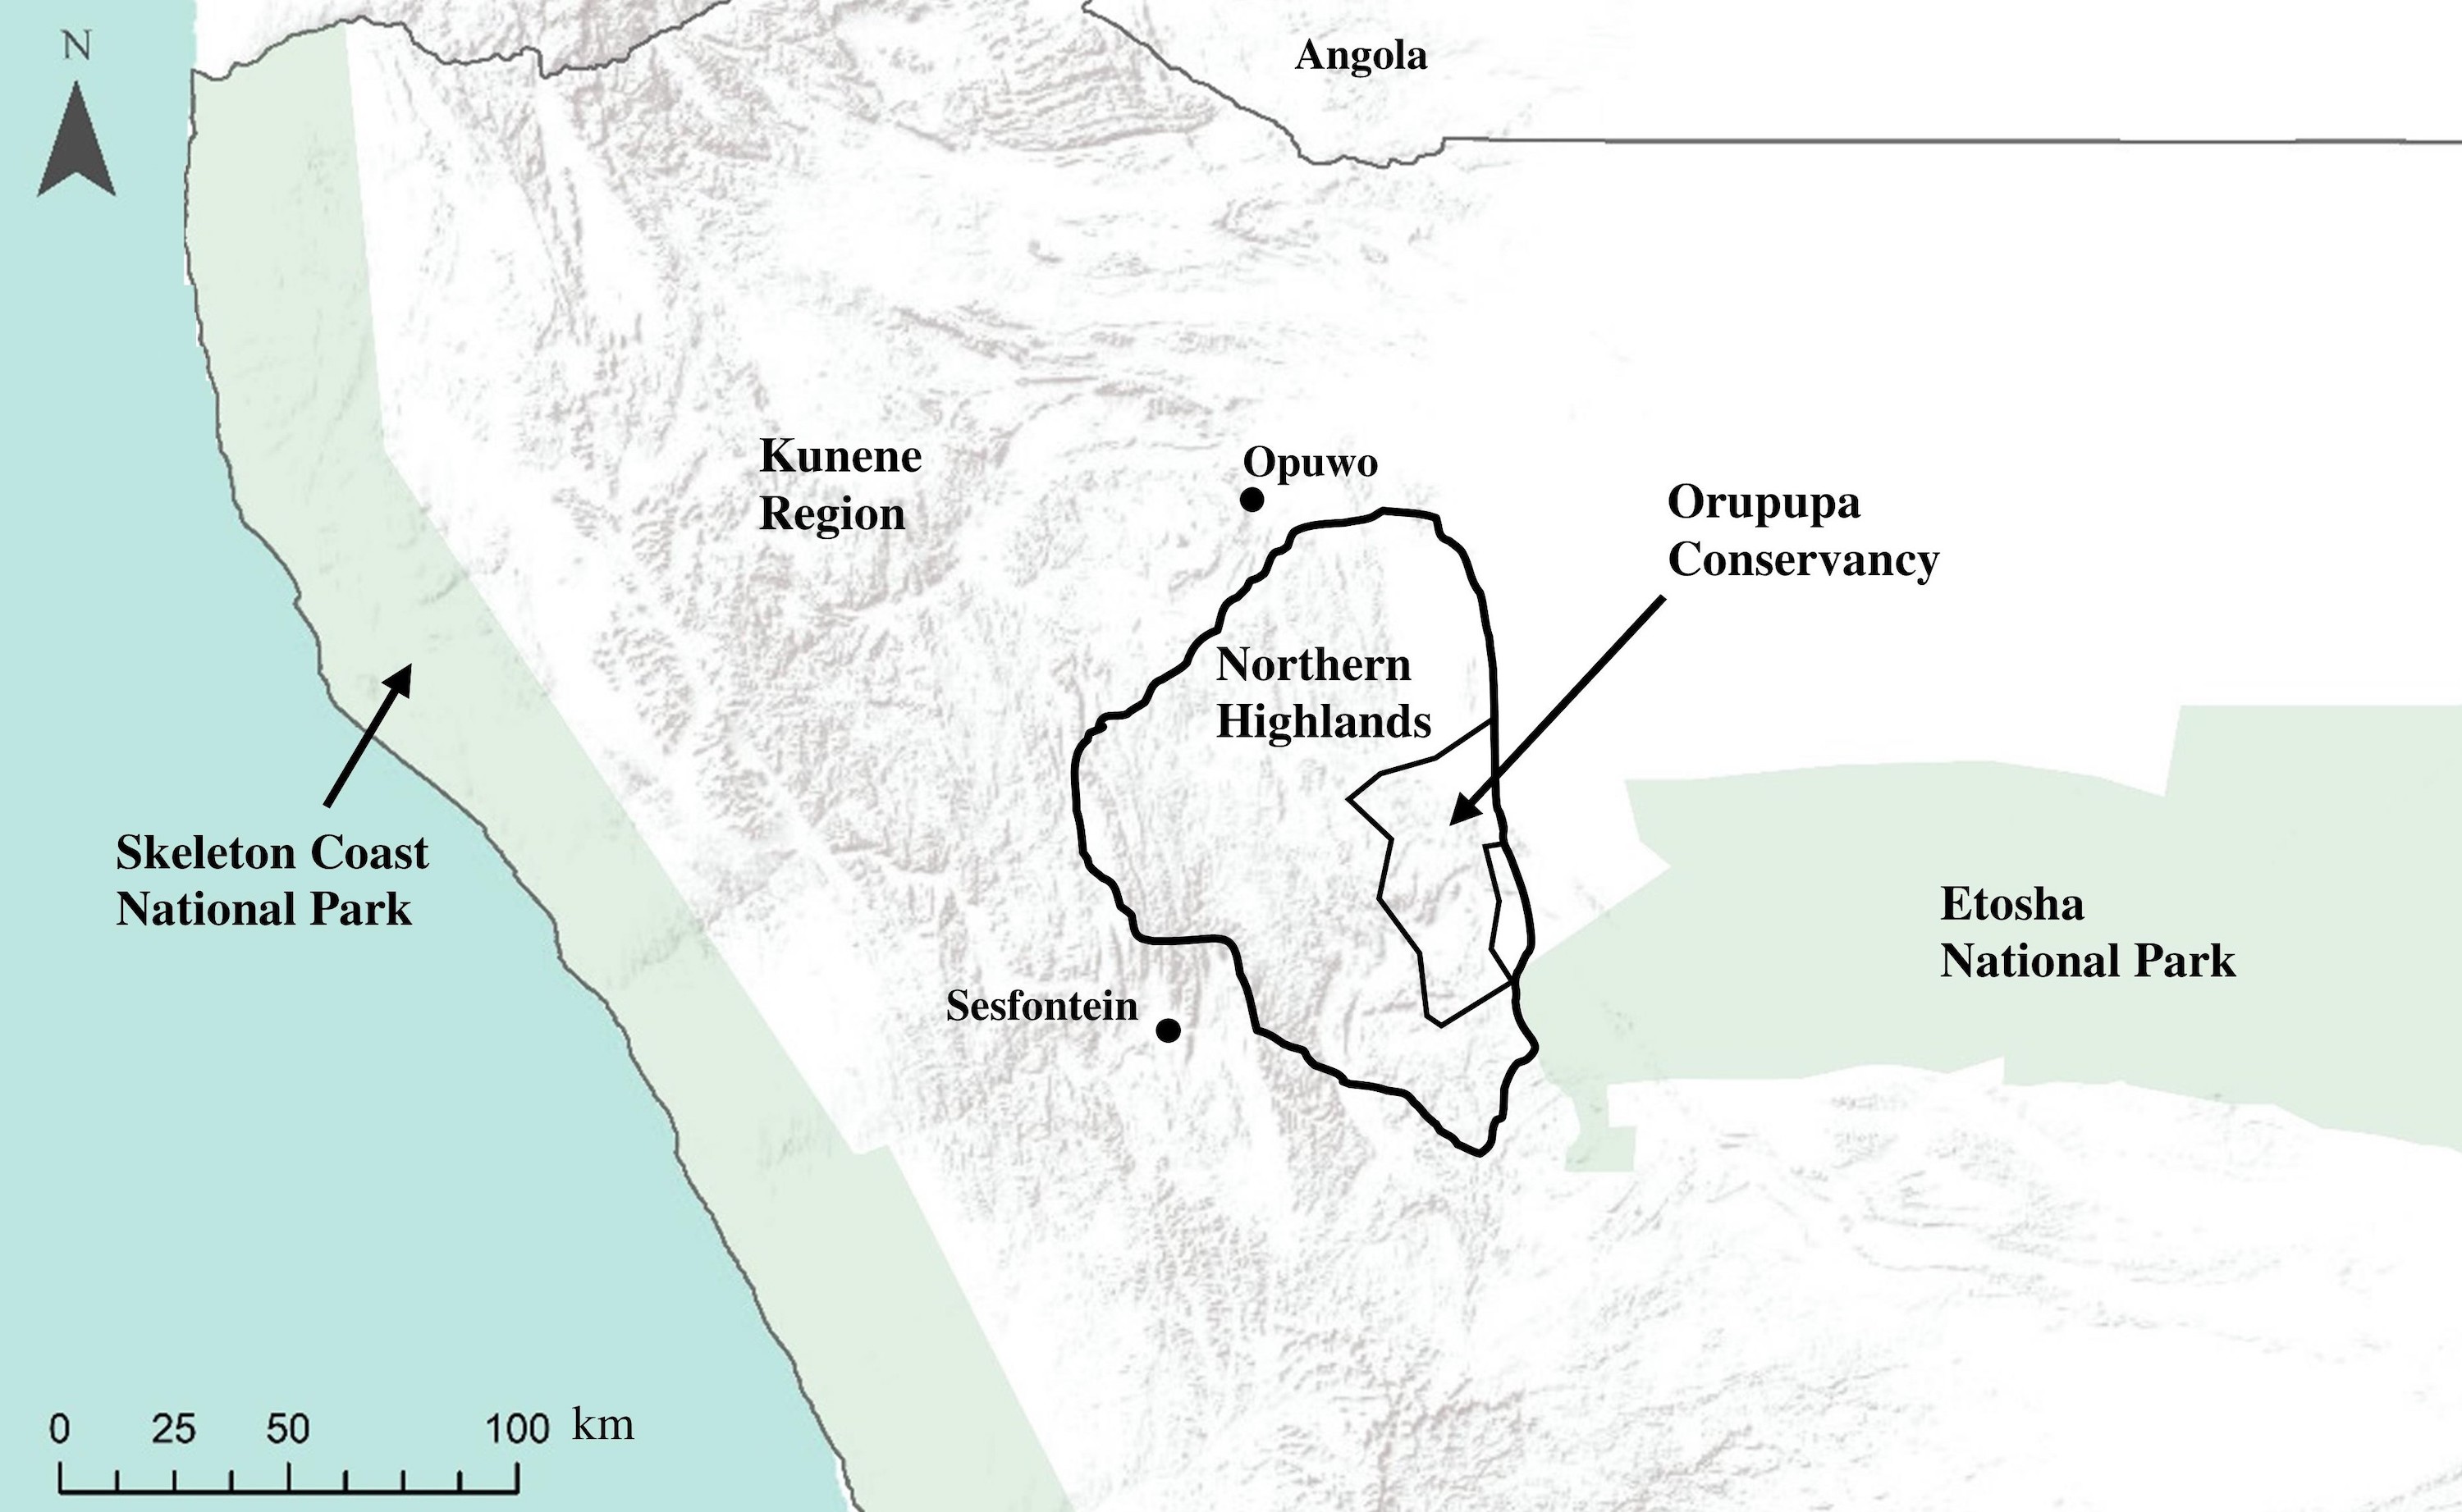 A map showing the location of the Kunene Region, the northern highlands and, Orupupa Conservancy in NW Namibia.